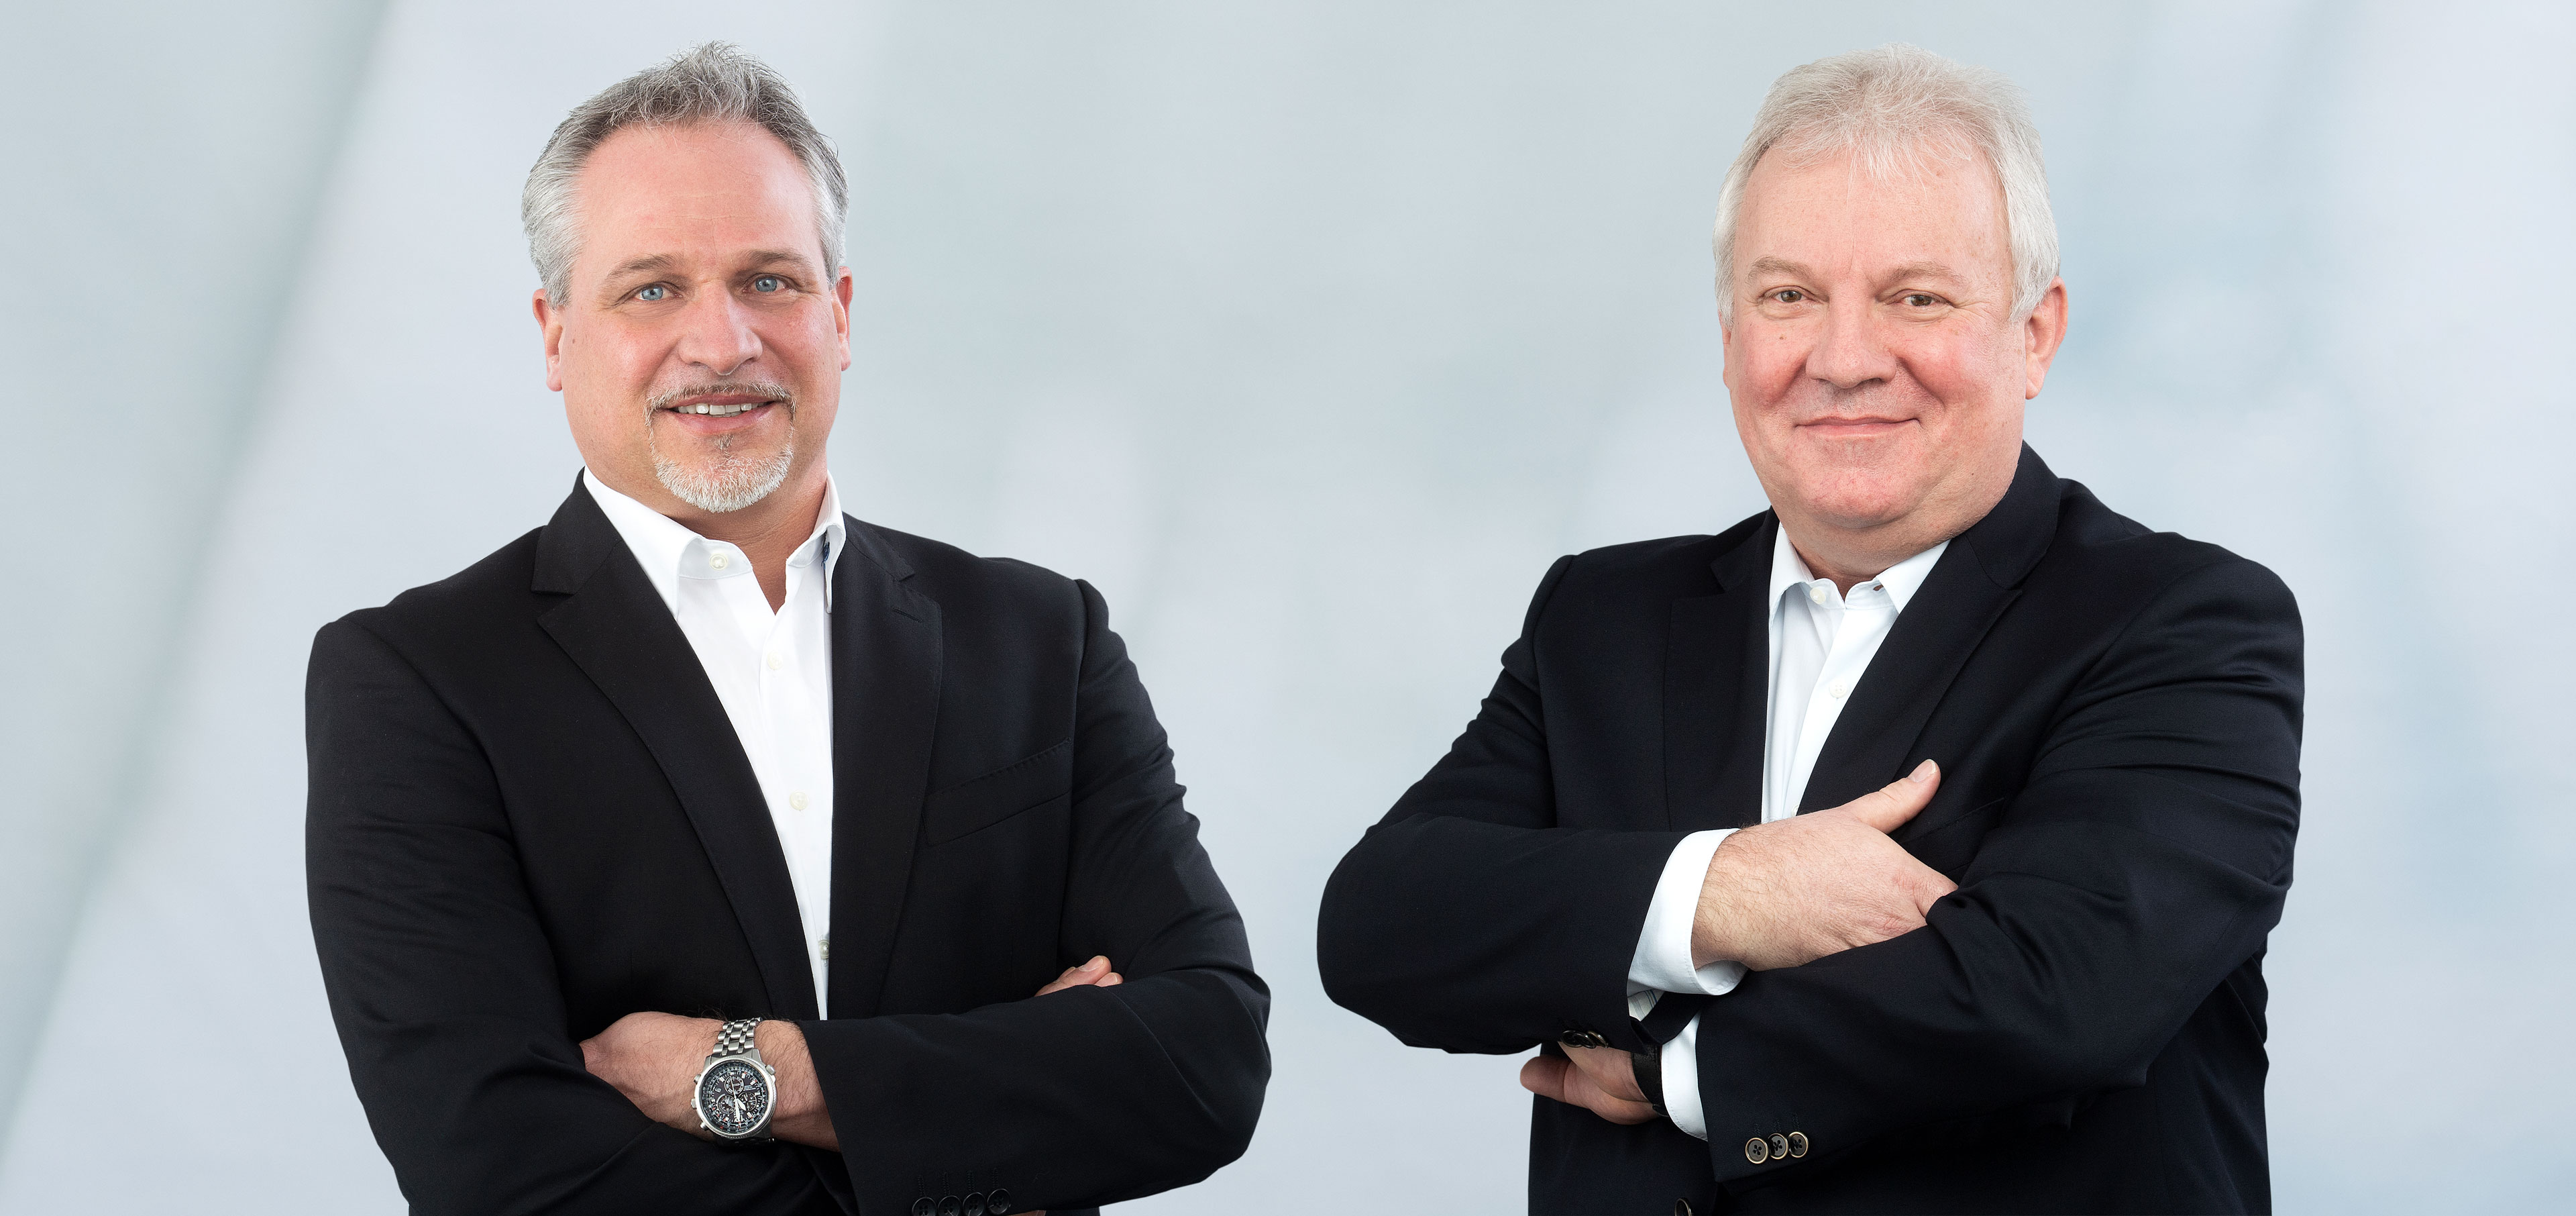 Head of Human Resources and Accounting Ulrich Schweikhardt and Managing Director Holger Wußmann